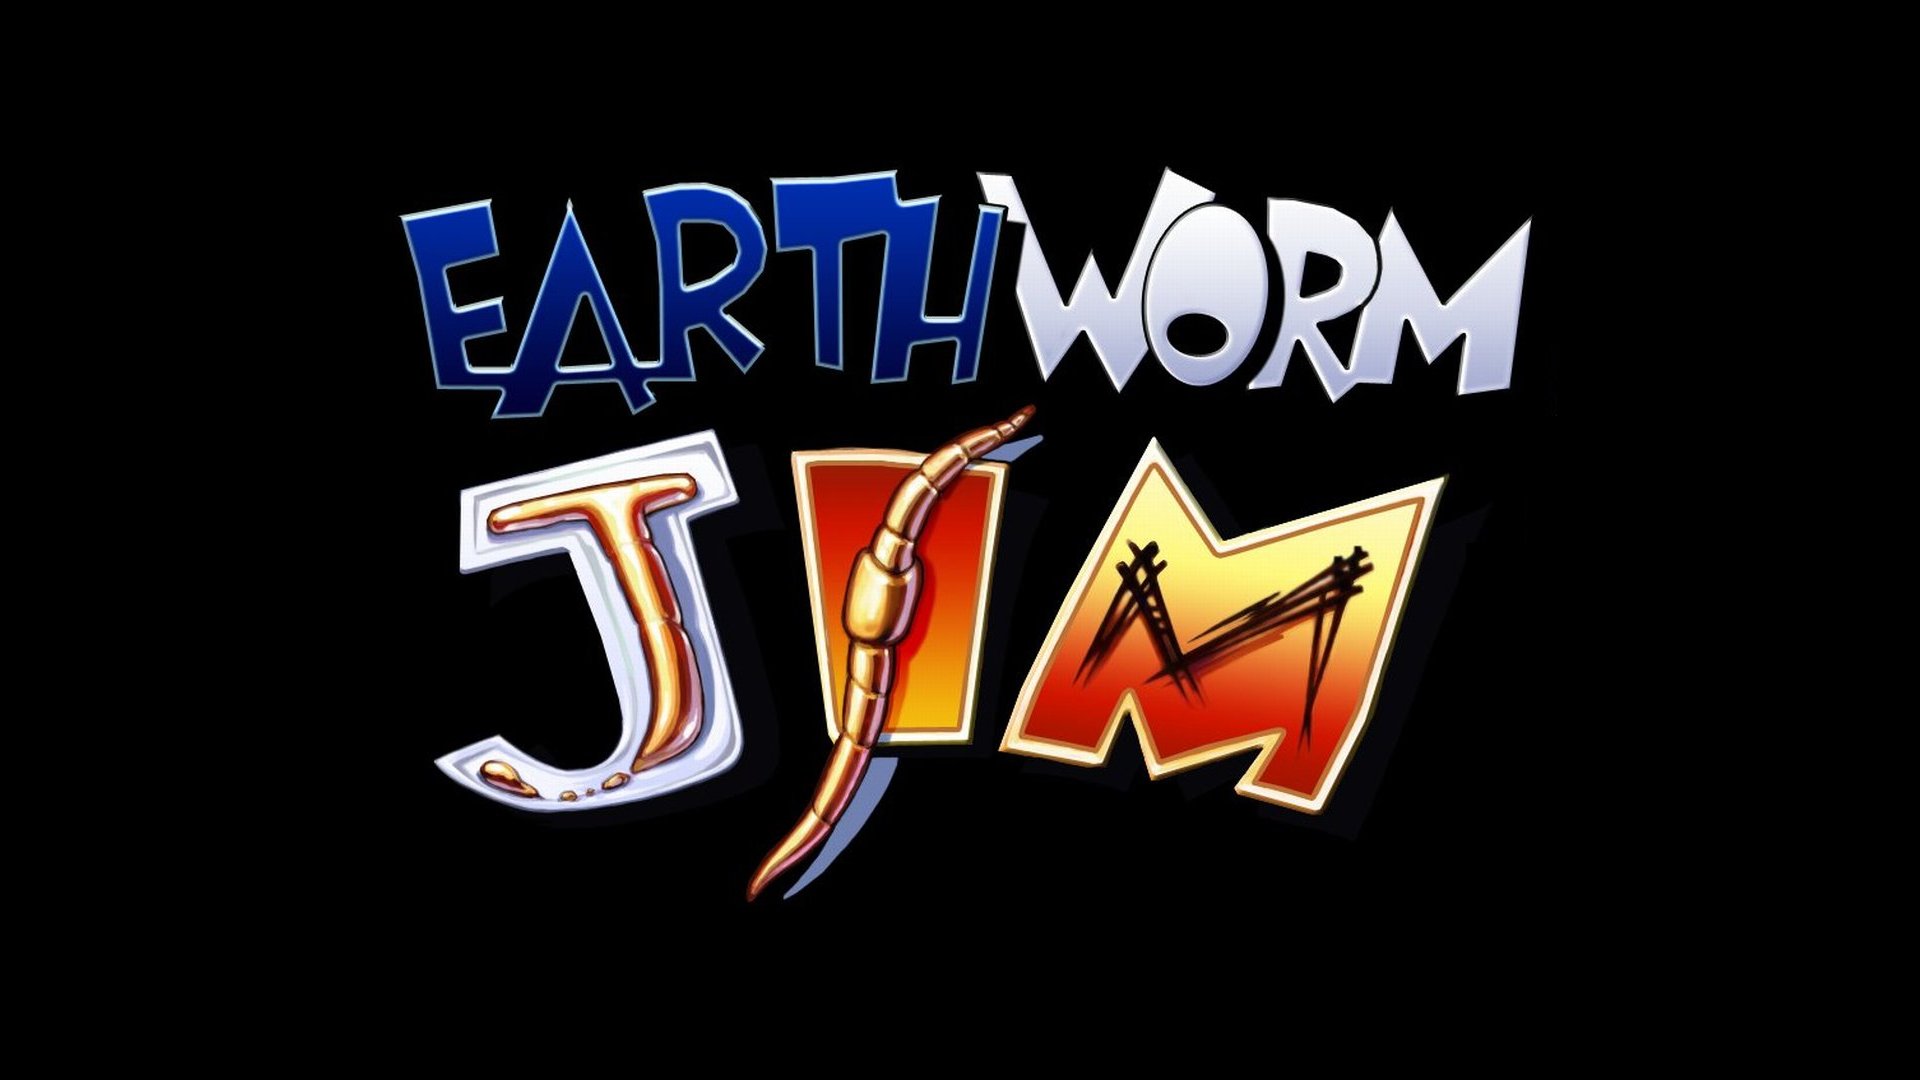 Let’s Play Earthworm Jim